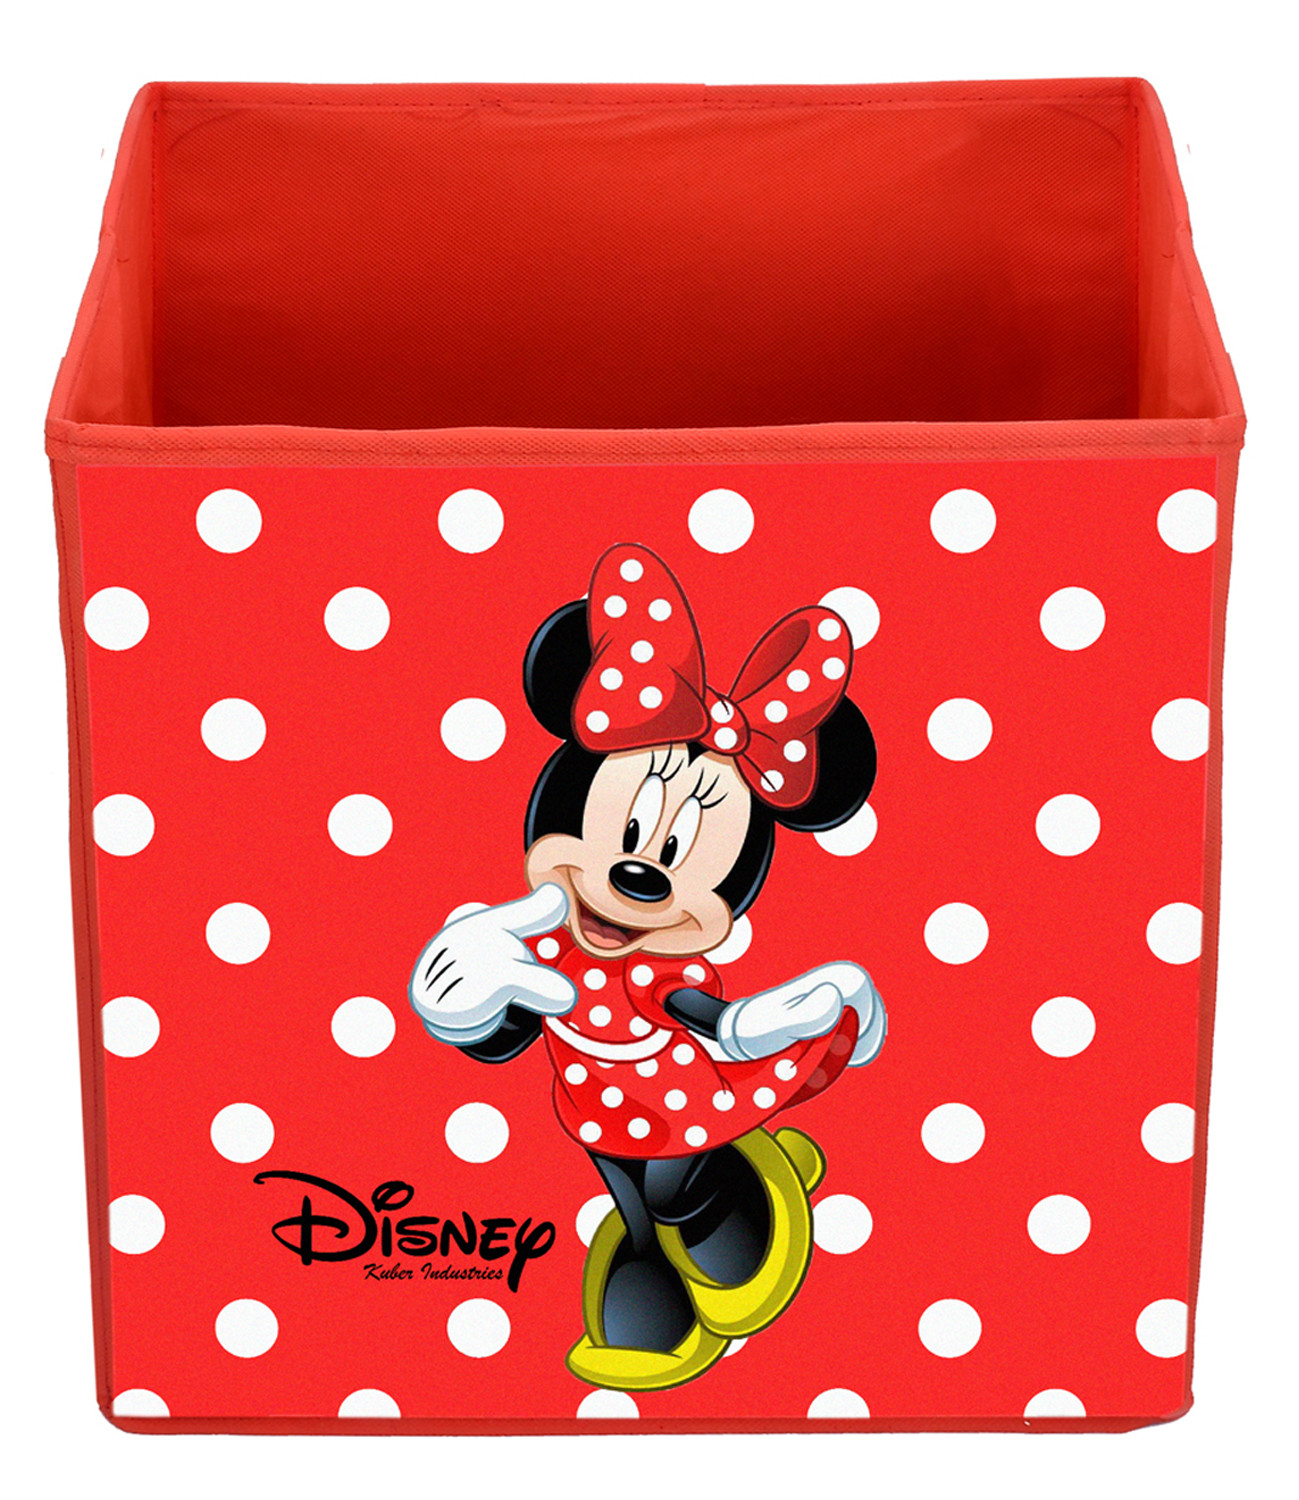 Kuber Industries Disney Print Non Woven Fabric 4 Pieces Foldable Large Size Storage Cube Toy,Books,Shoes Storage Box With Handle (Black,Red,Maroon & Brown)